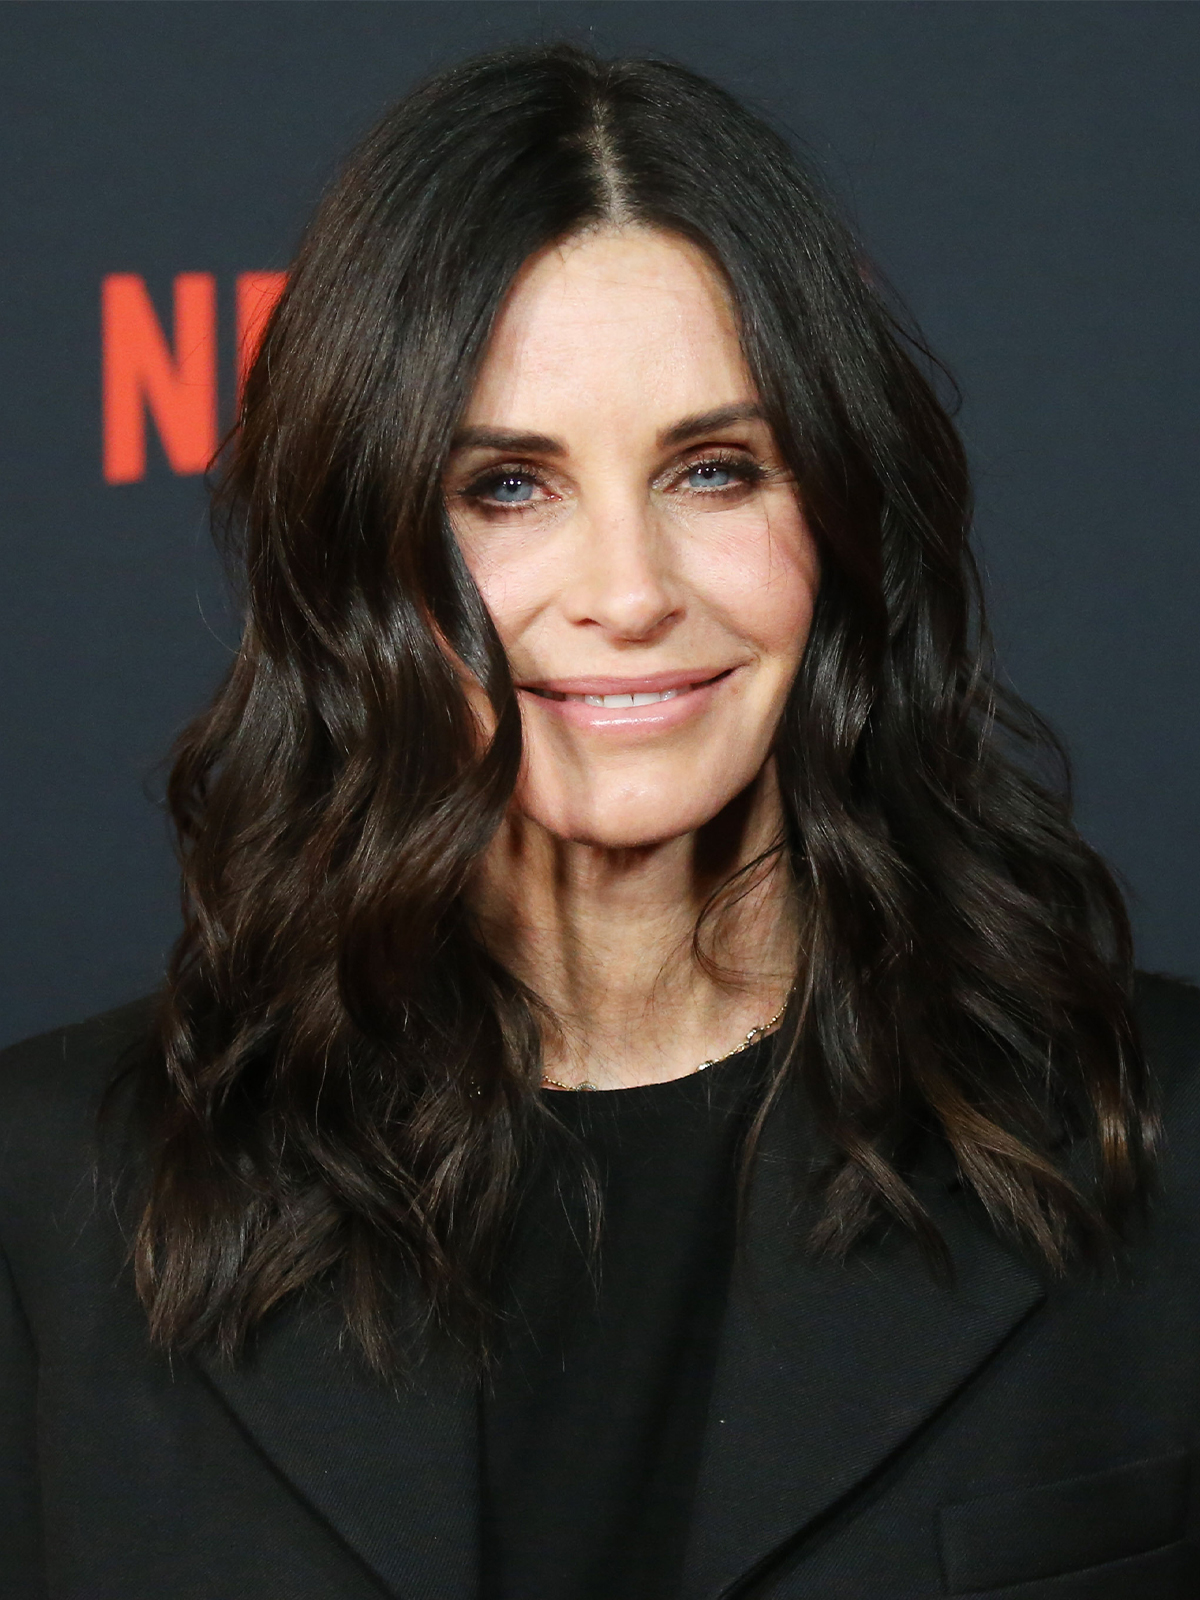 Haircuts for Women in Their 50s: Courteney Cox